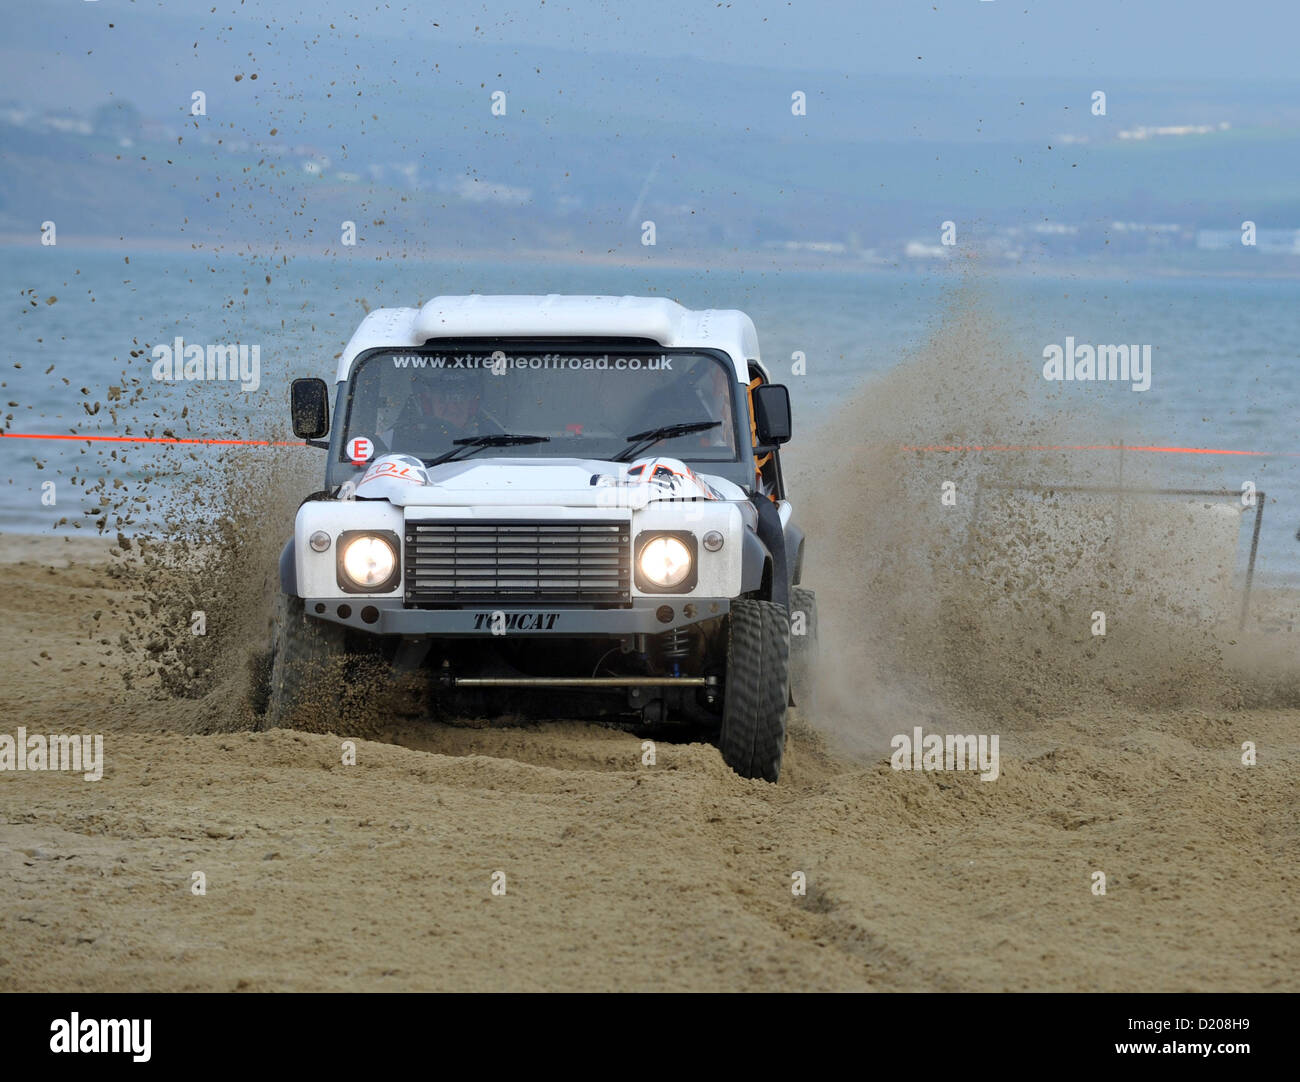 Extreme off road racing press and media day at Weymouth Dorset, Britain. The beach will be taken over for two days in February and used as a race circuit which will include many jumps dug into the sands. 9th January, 2013 PICTURE BY : DORSET MEDIA SERVICE Stock Photo